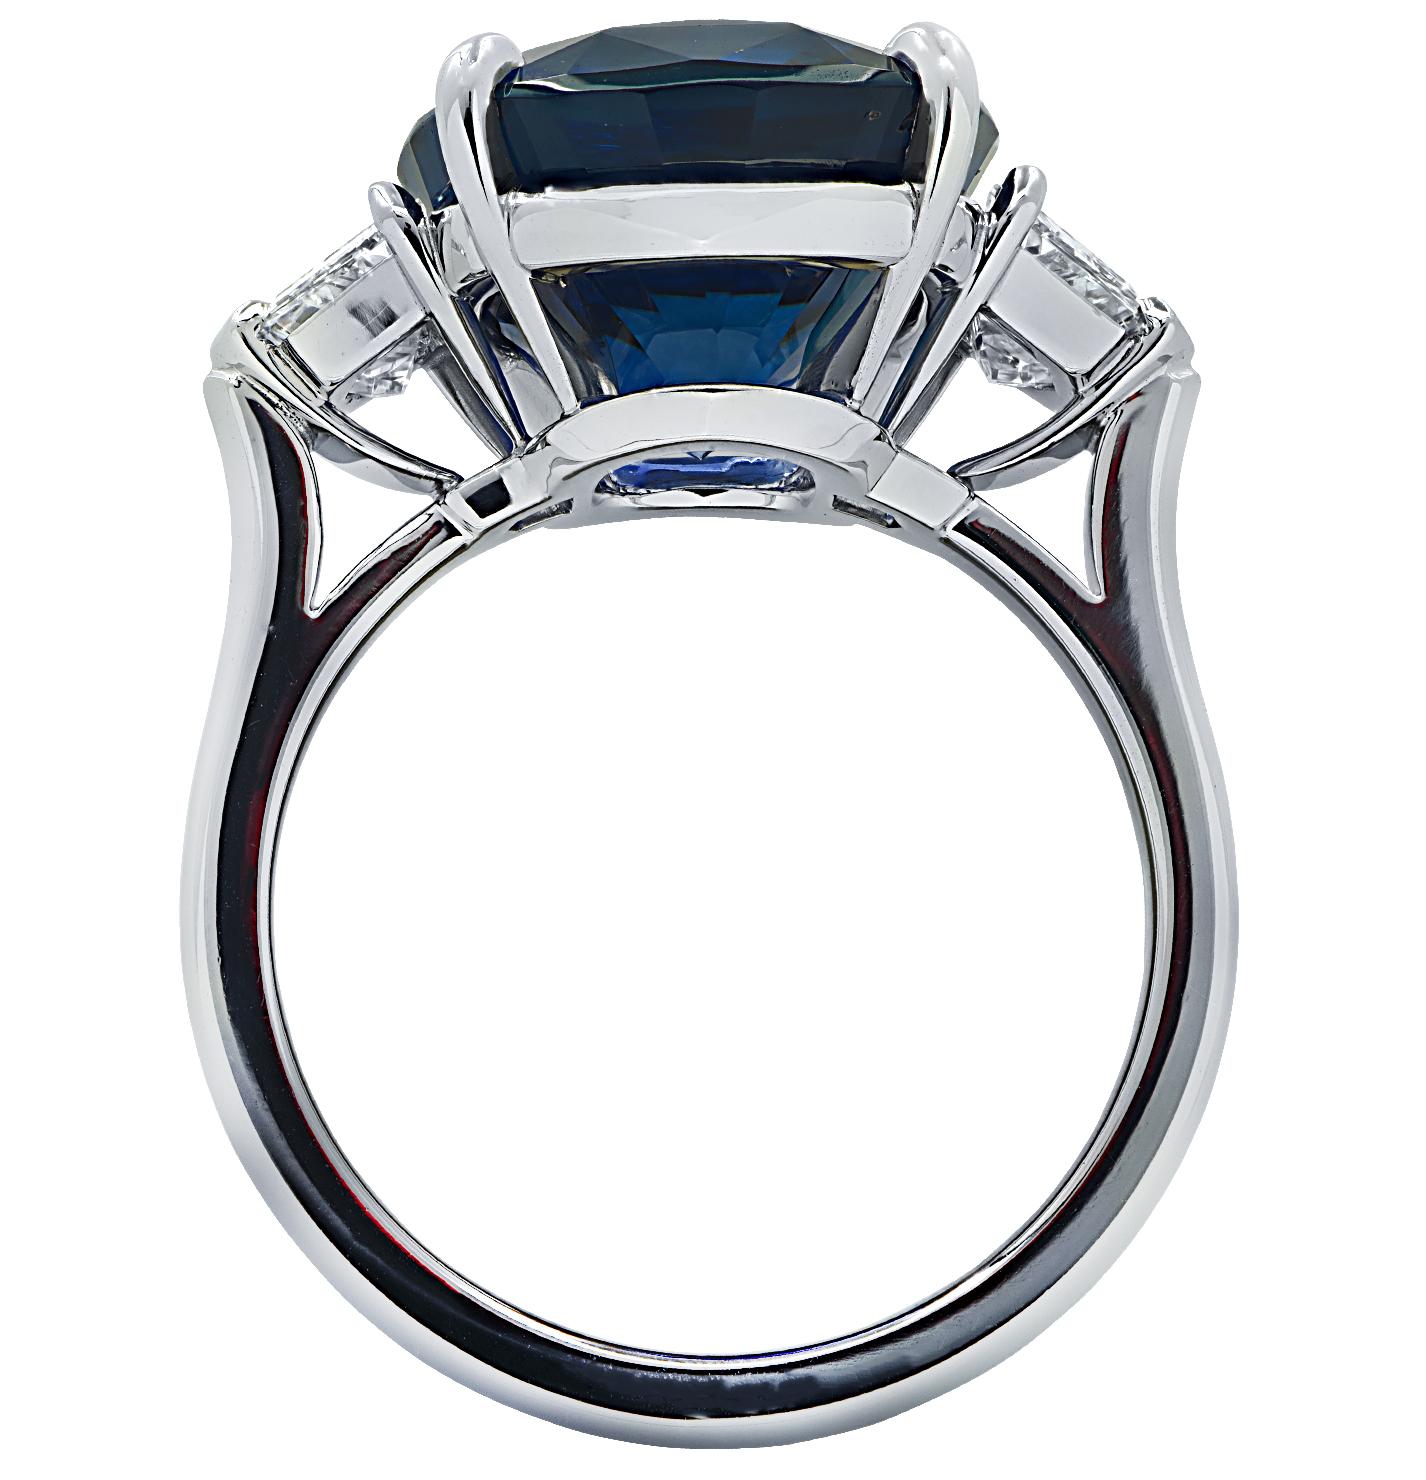 Exquisite ring crafted in platinum showcasing a spectacular cushion cut blue Sapphire weighing 10.56 carats, accompanied by two Cadillac cut diamonds weighing 1.02 carats total, E color VS clarity. The face of this sensational ring measures 13.7 mm